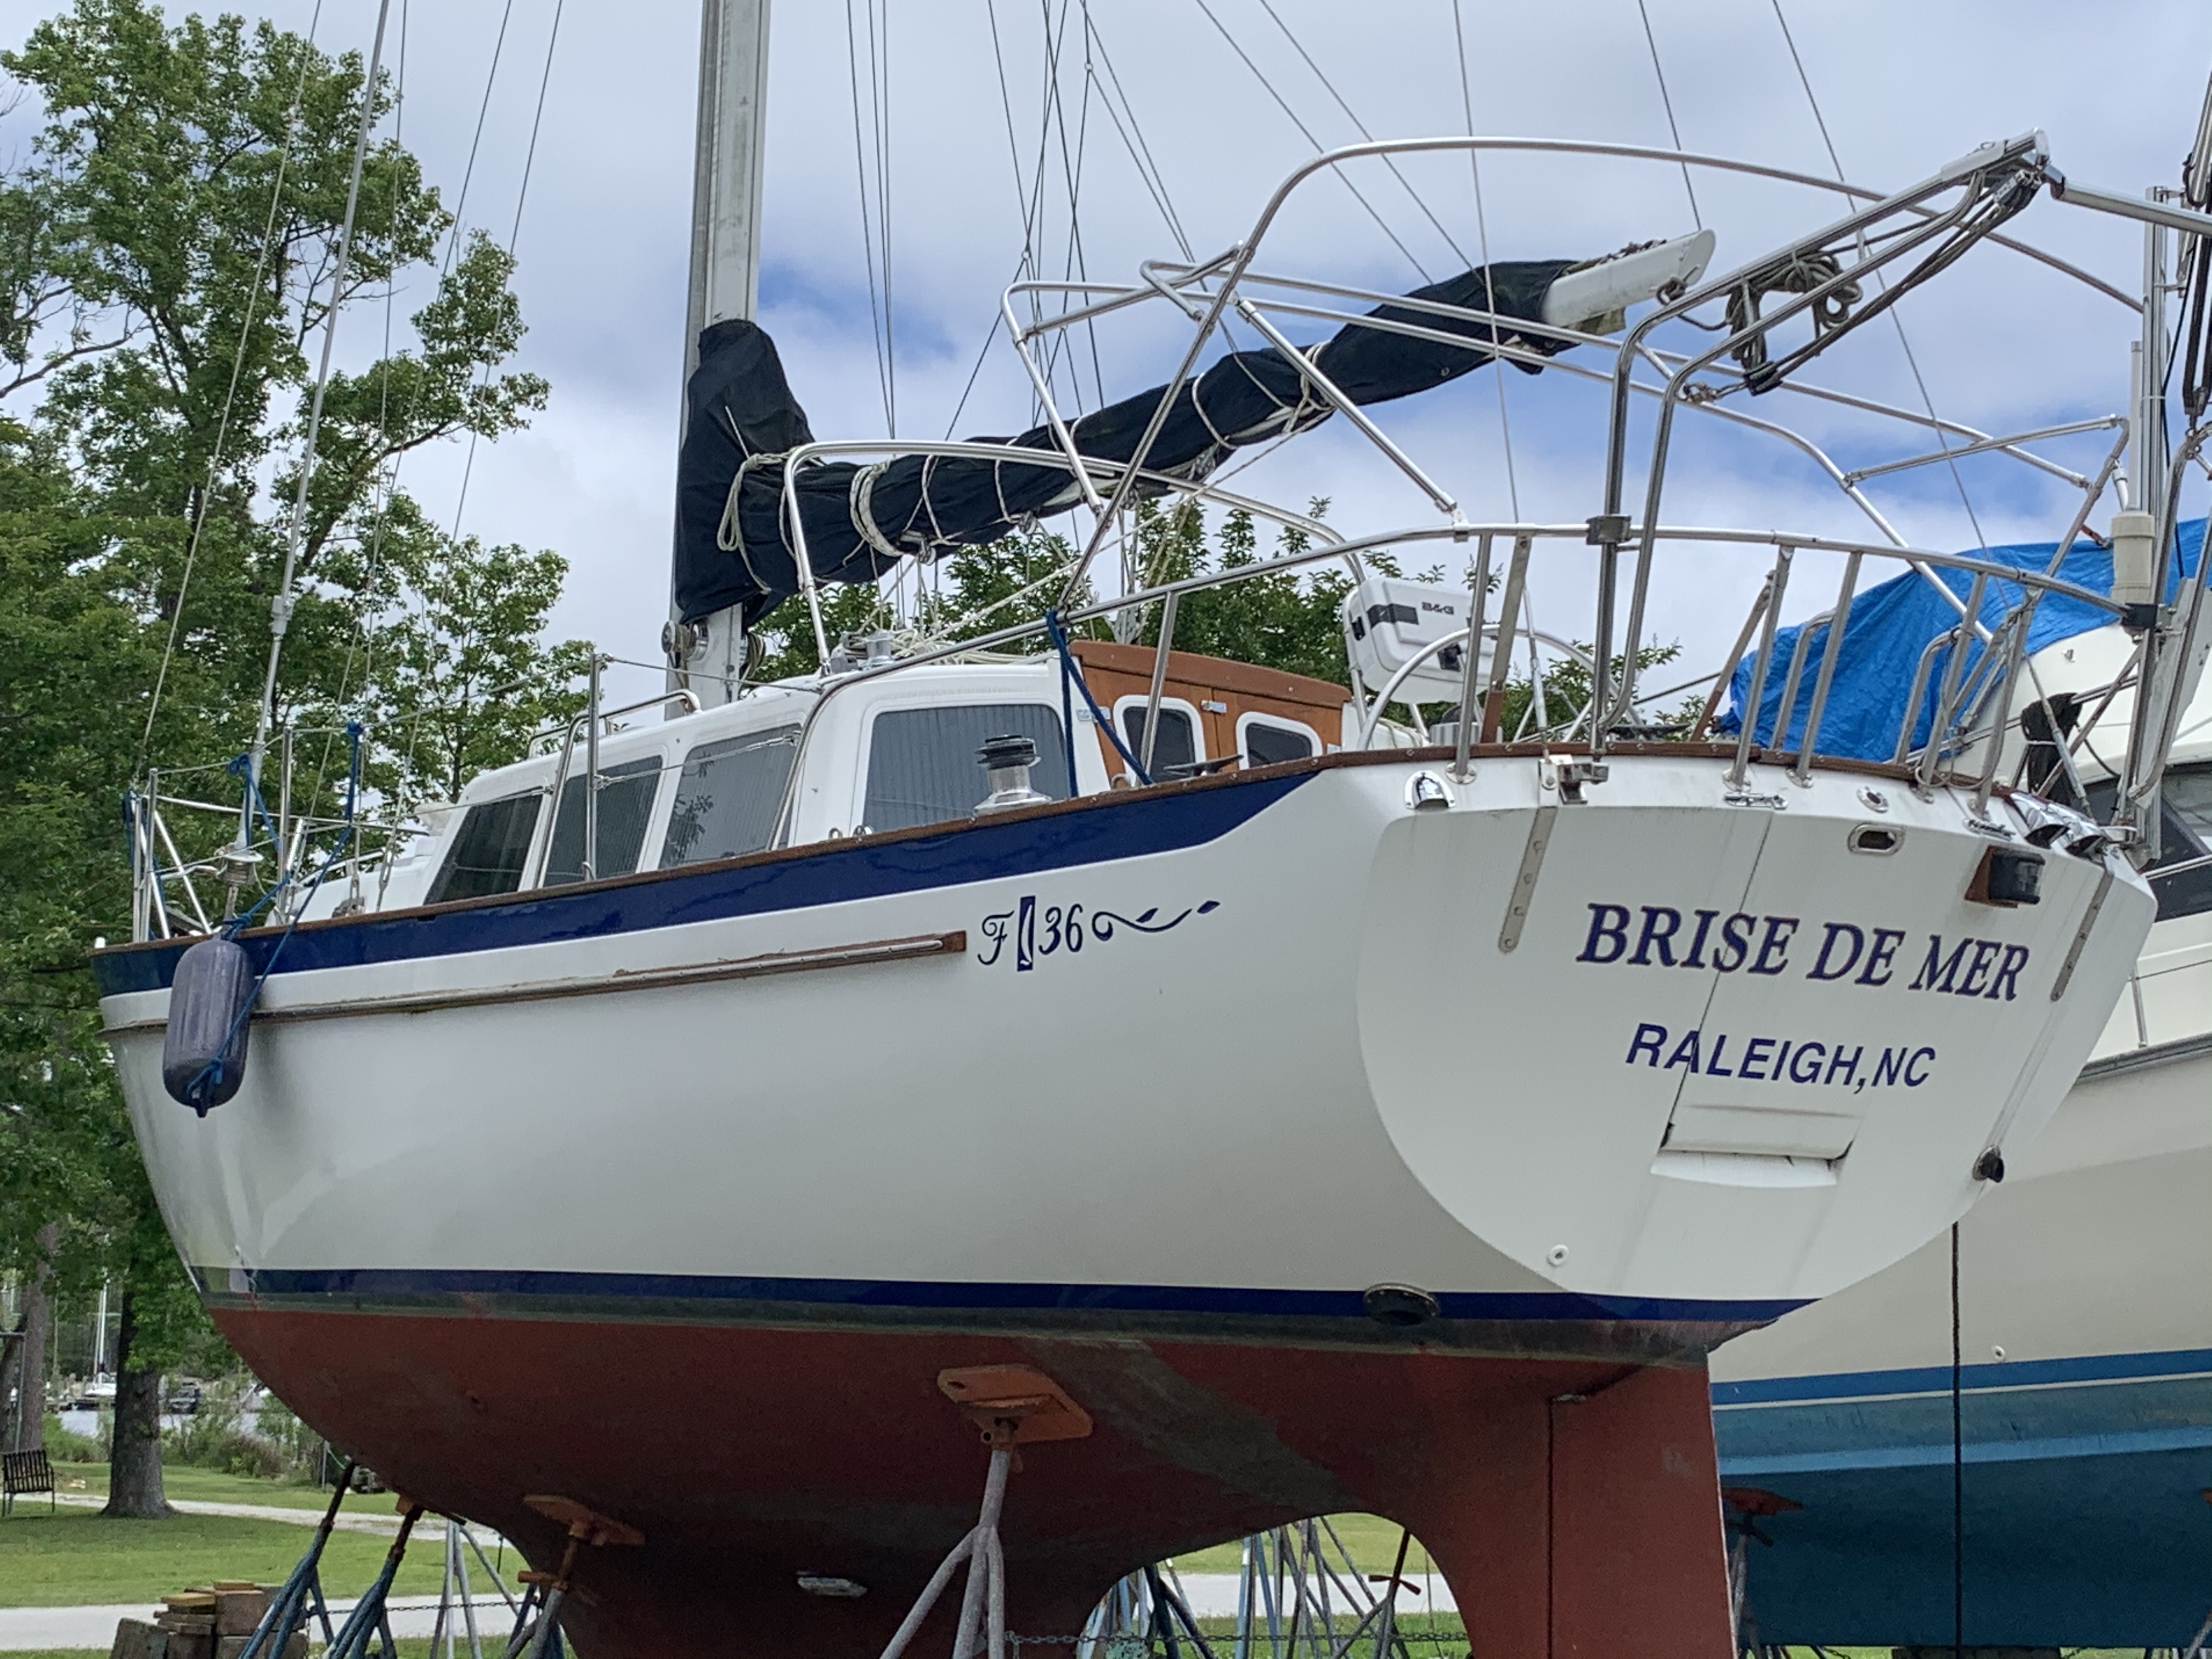 sailboats for sale near new jersey